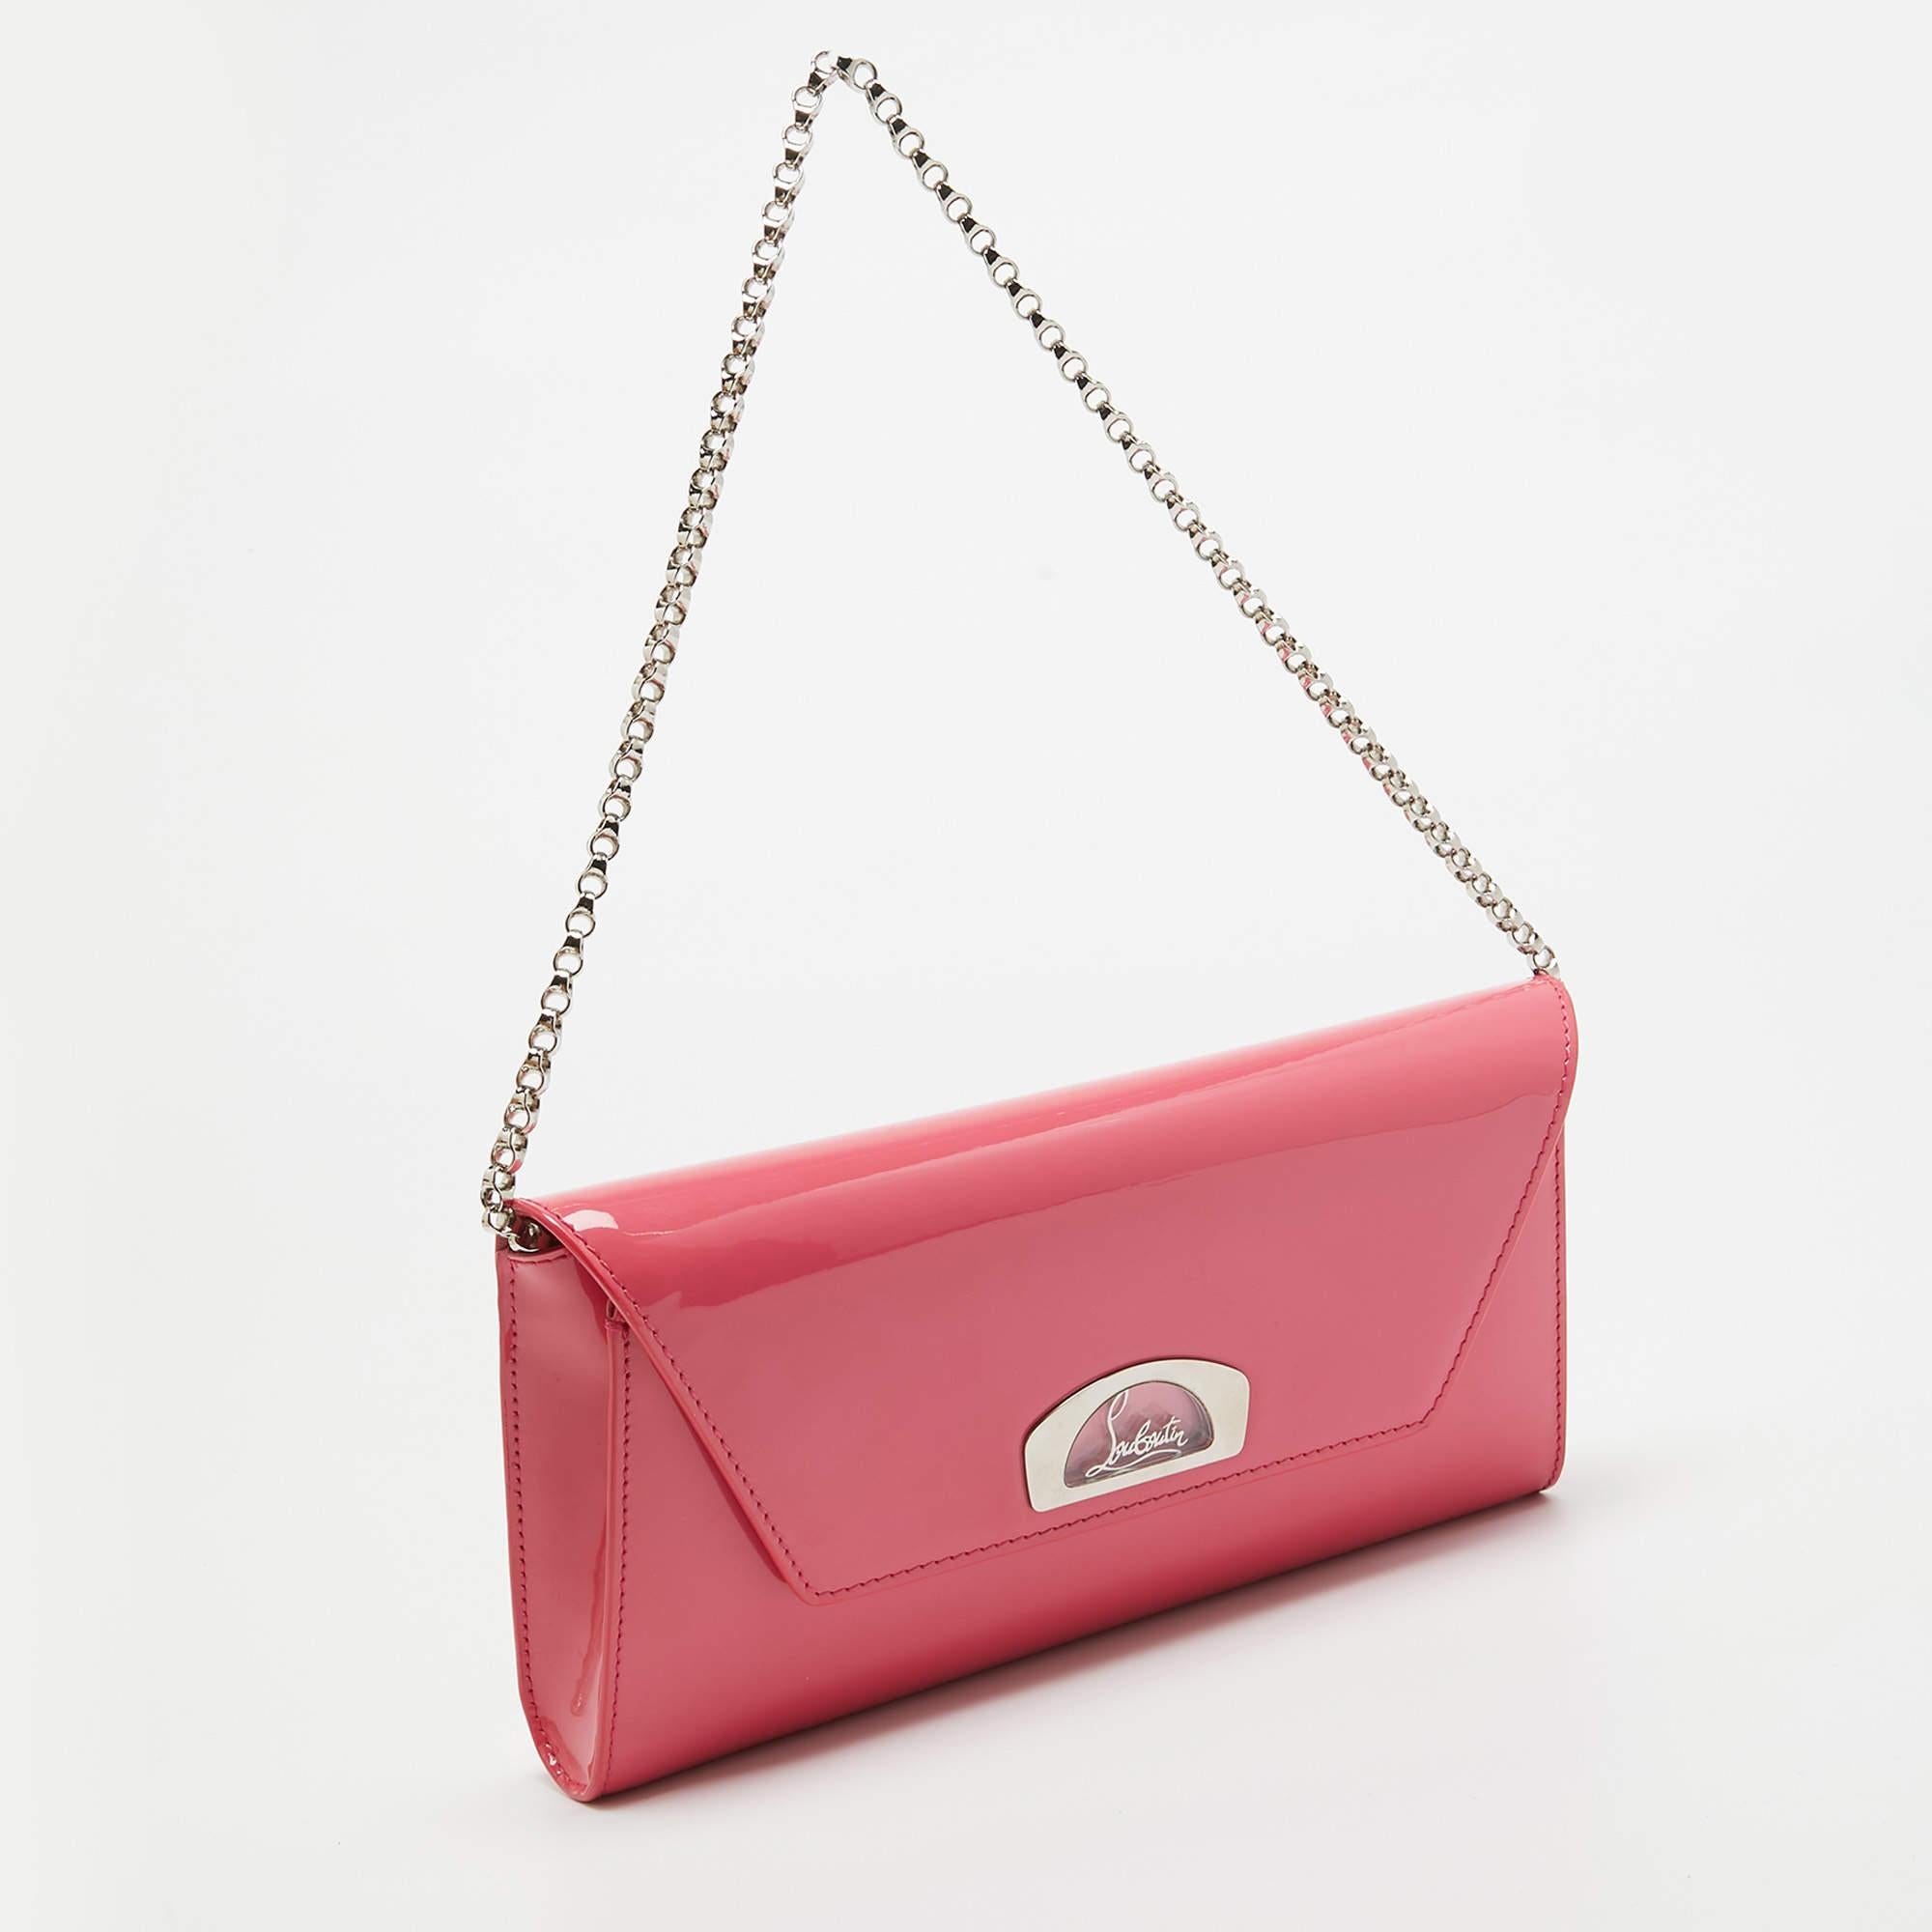 Christian Louboutin Pink Patent Leather Vero Dodat Chain Clutch For Sale 5